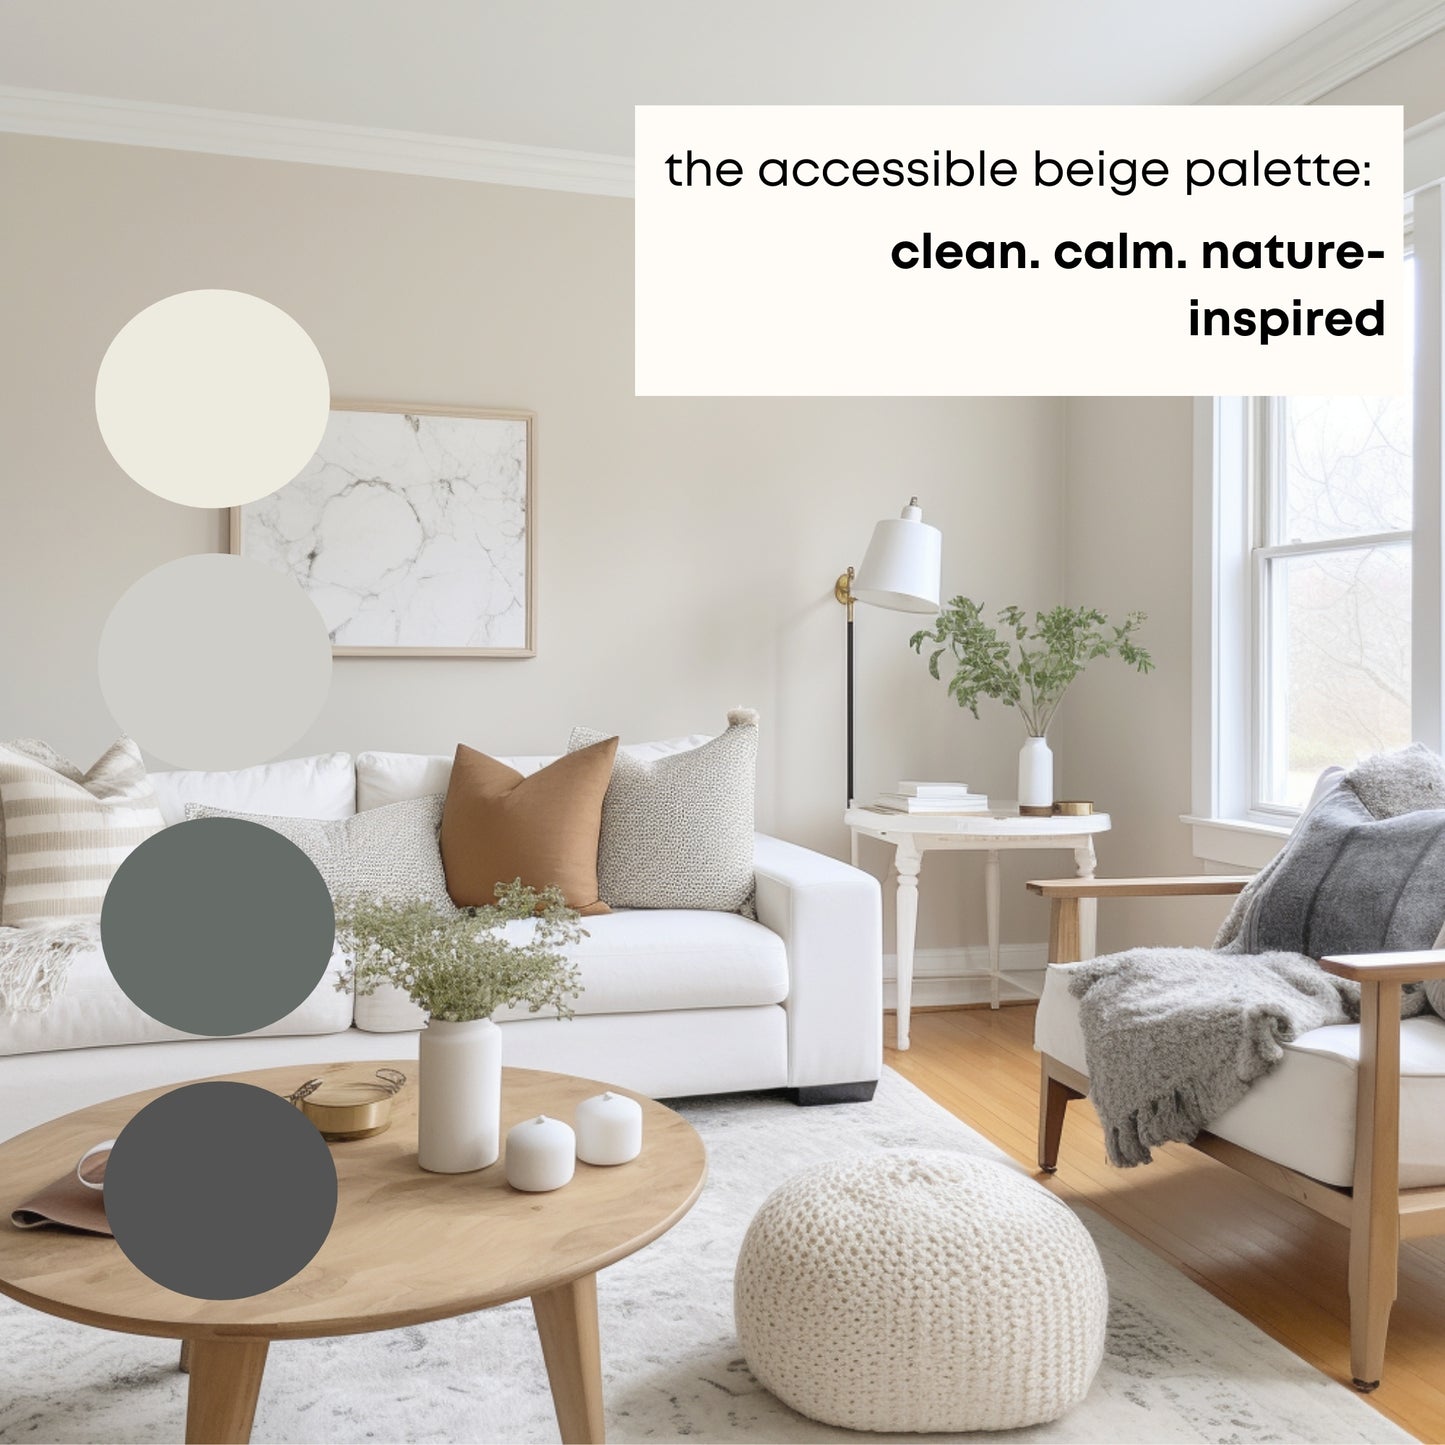 Accessible Beige Sherwin Williams Paint Palette, Modern Neutral Interior Paint Colors for Home, Accessible Beige Compliments, Warm Whites, Evergreen Fog